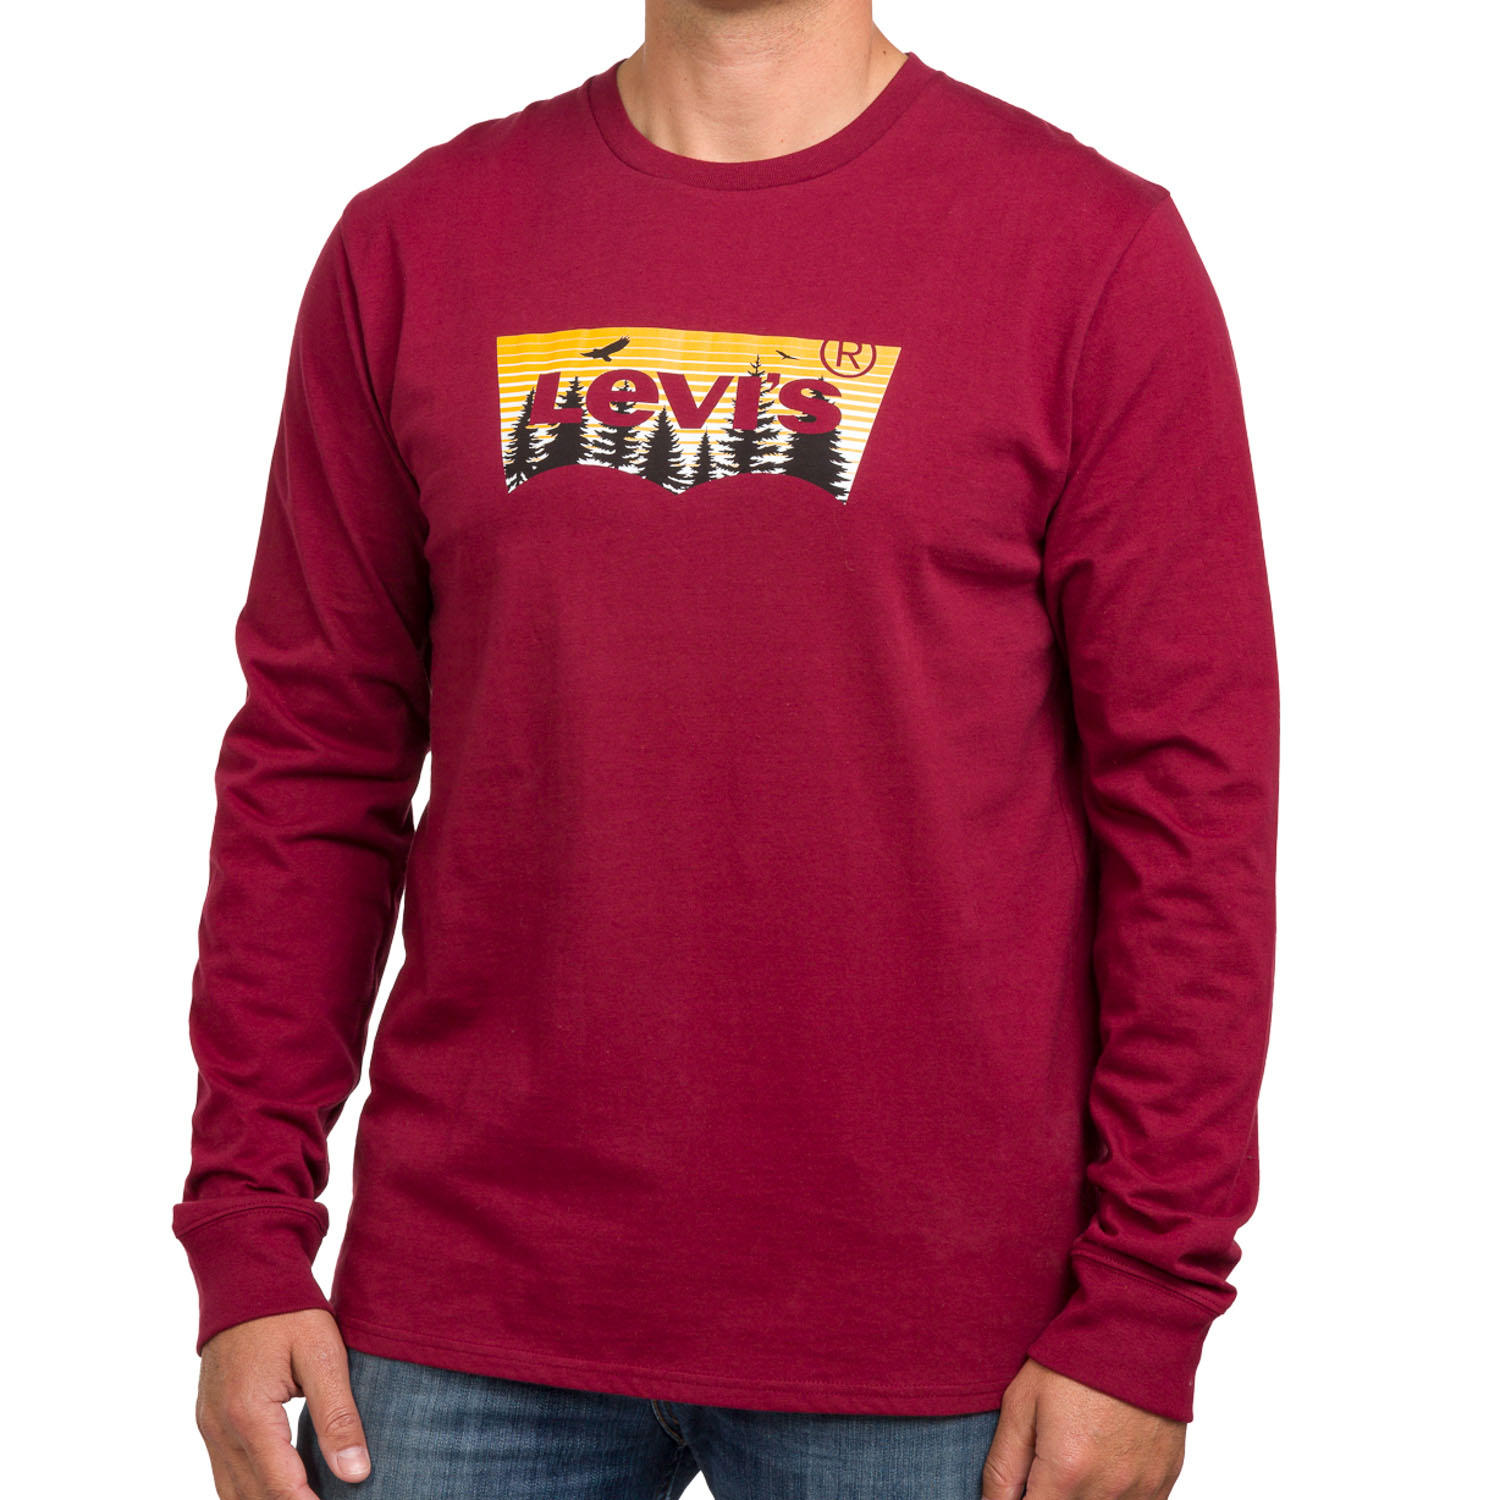 Men’s Levi’s Long Sleeve Graphic Tees for $4.81